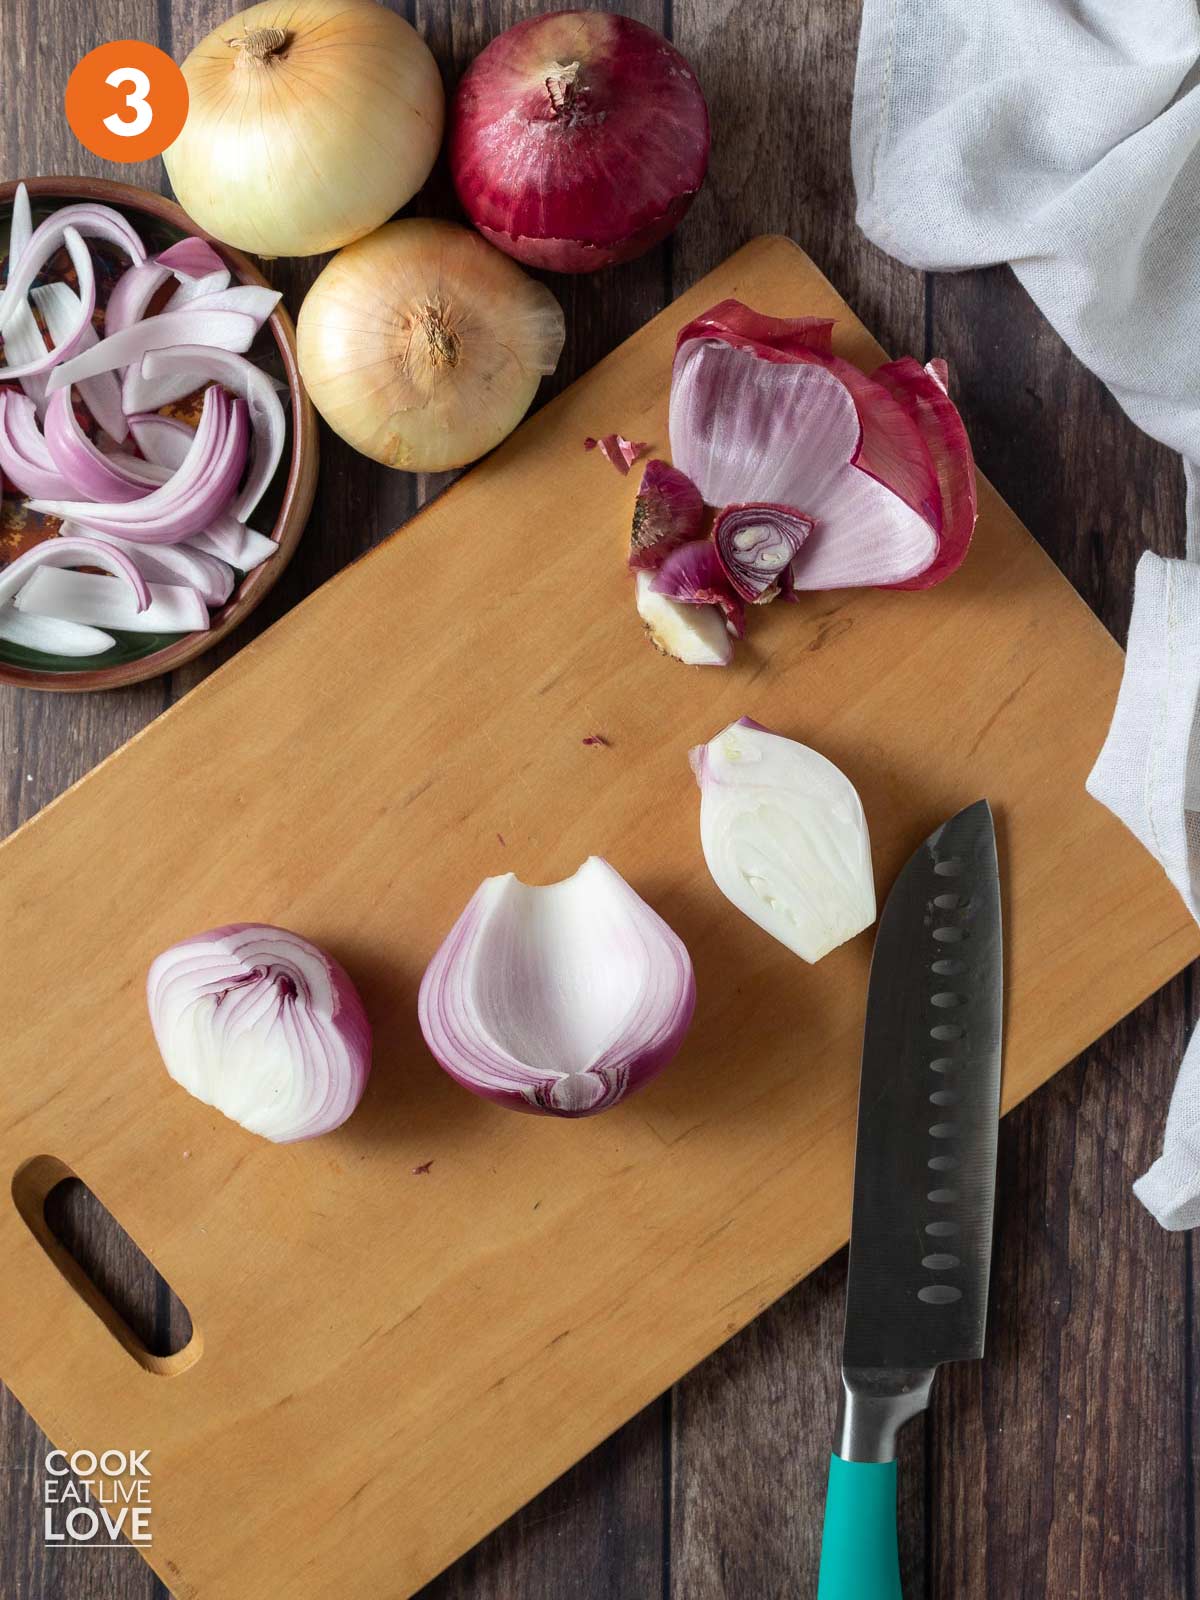 The small core is removed from the center of each half of onion.